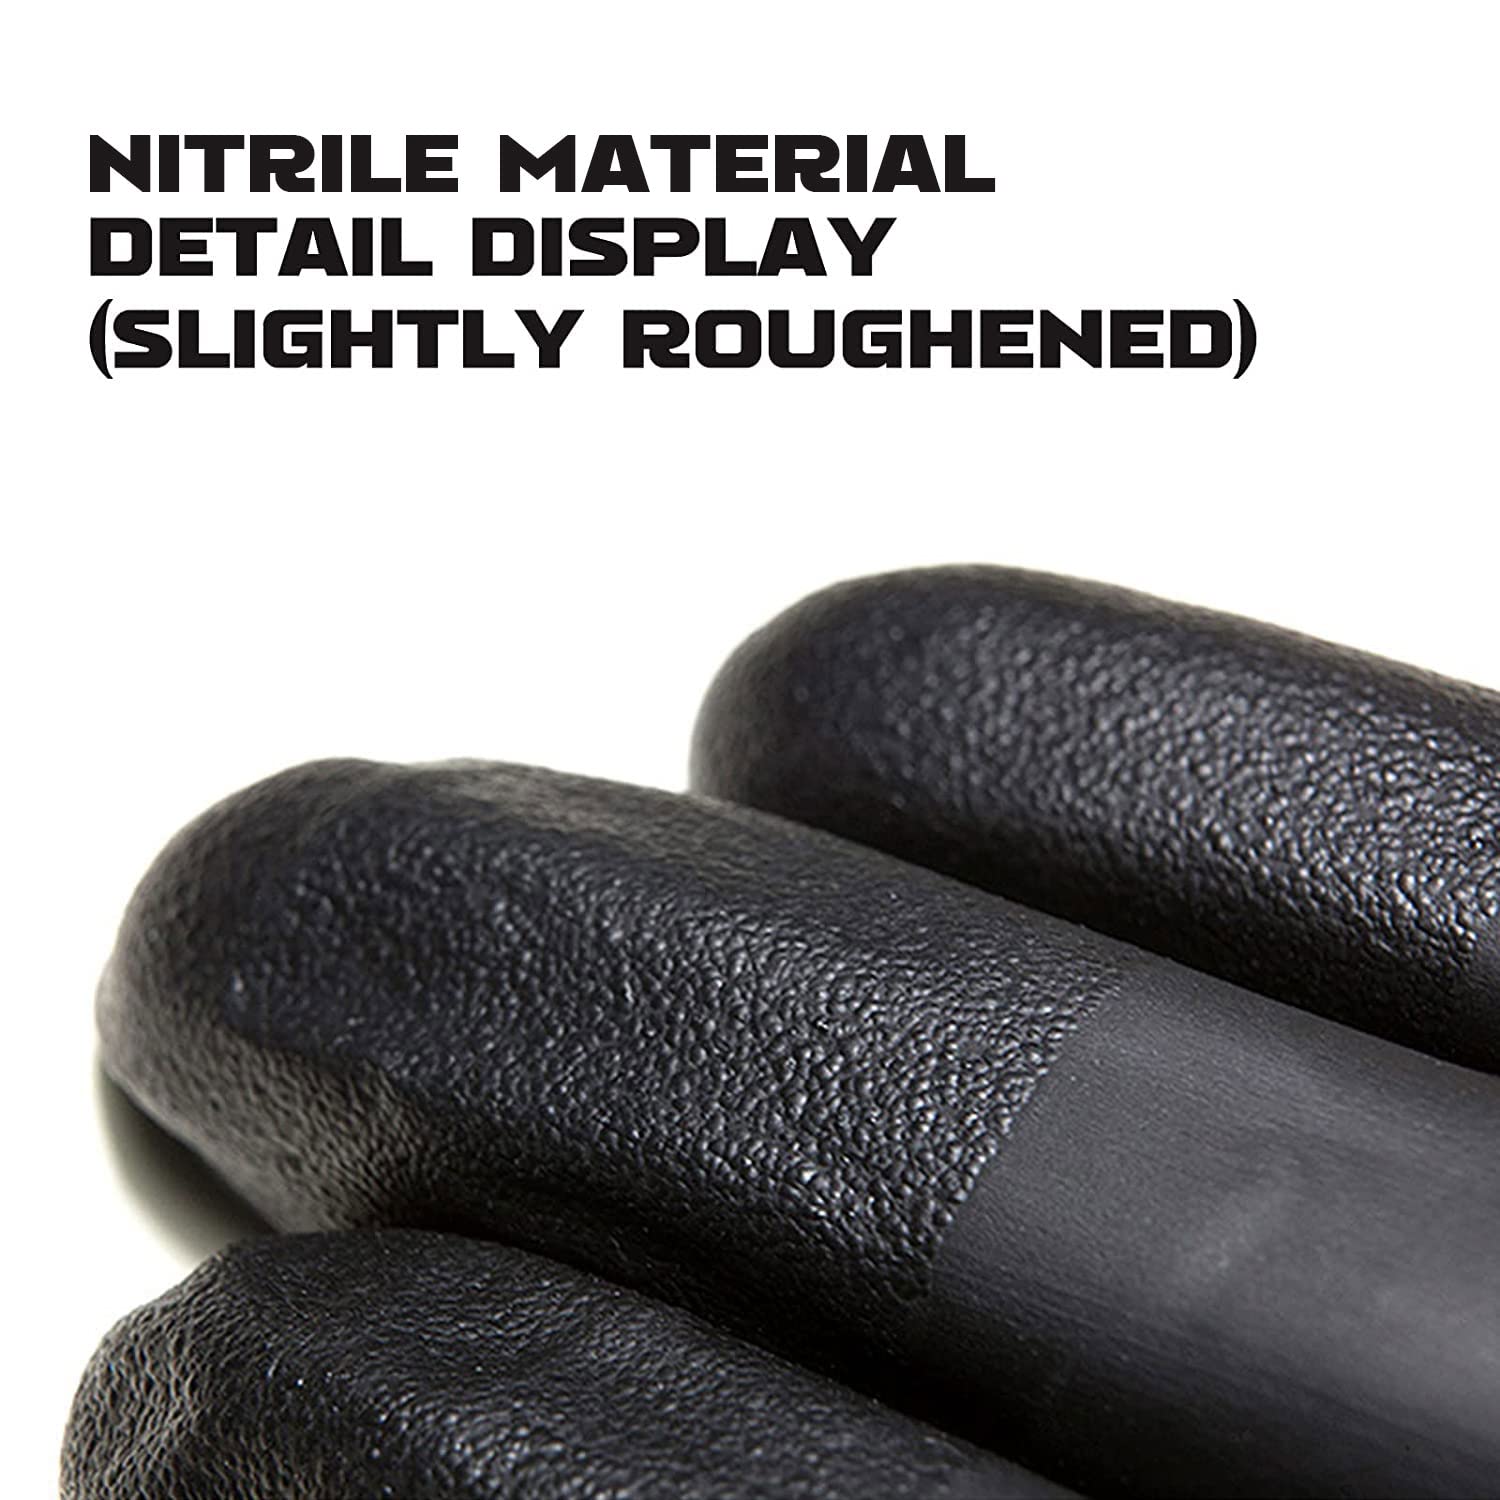 GMG SINCE1988 Nitrile Gloves Latex-Free, Powder-Free Ultra-Strong Tensile,50 Pack Household Cleaning Gloves